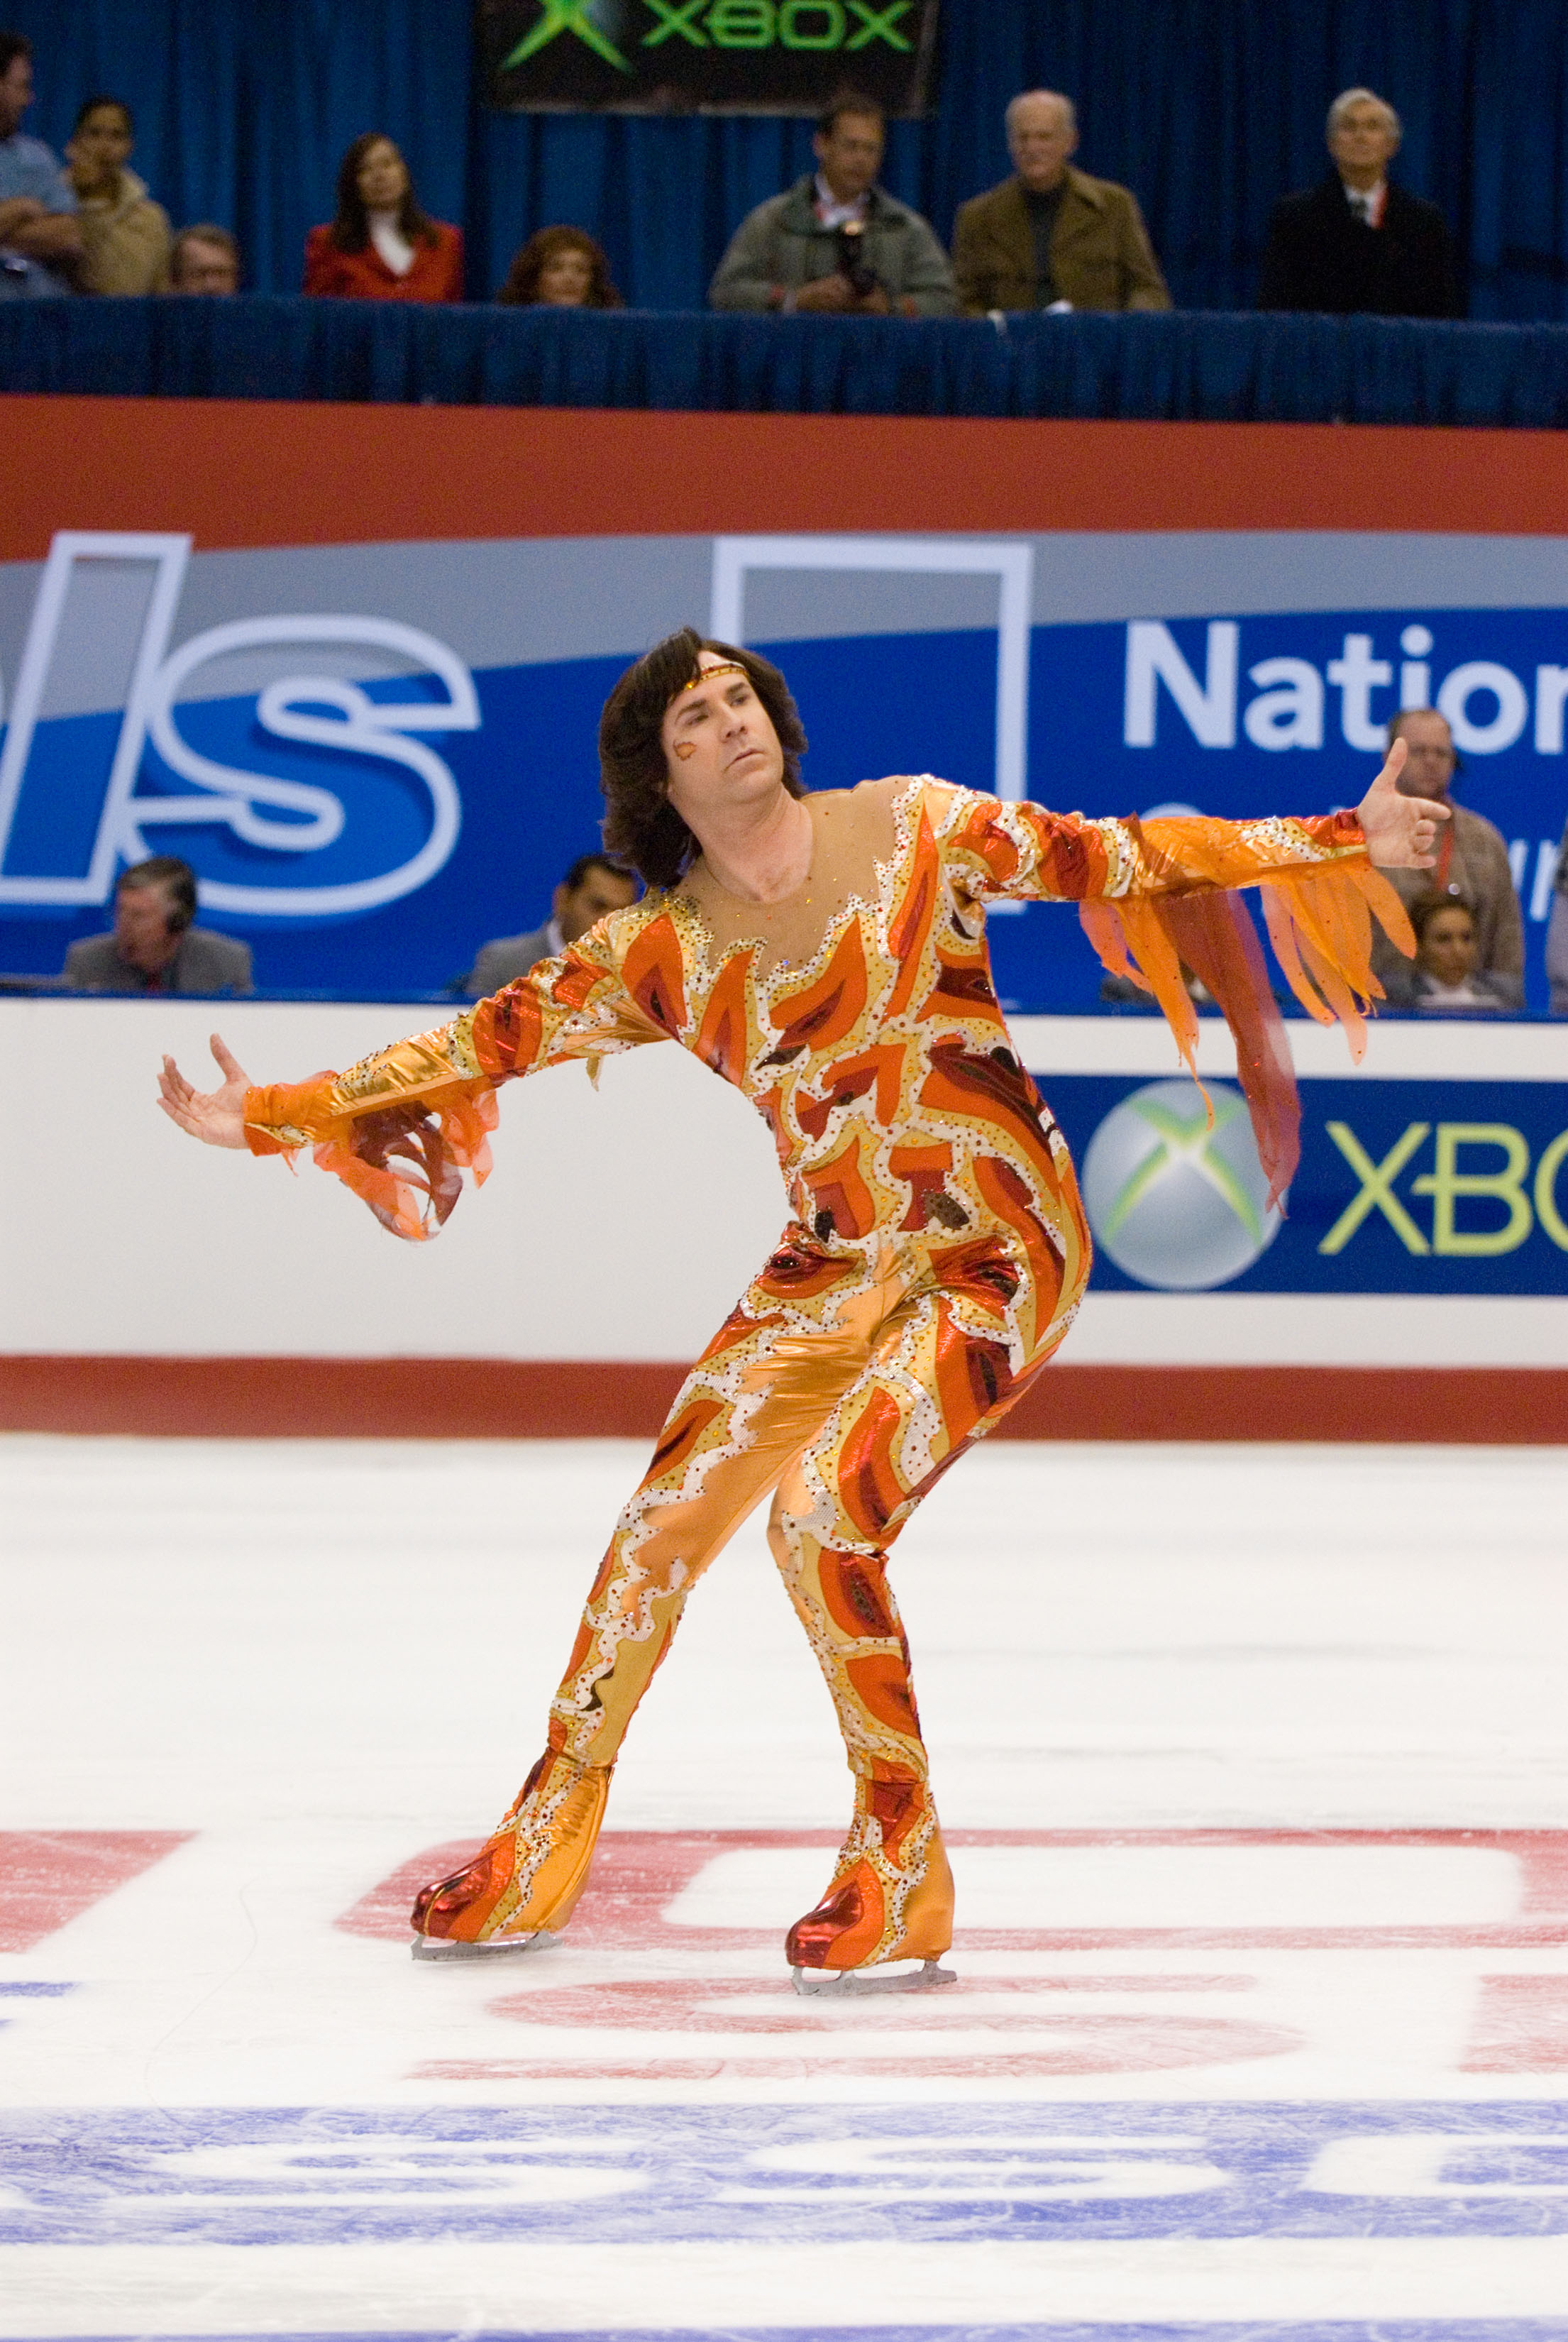 <p>"We're gonna skate to one song and one song only." "Blades of Glory" comes in at No. 15 due to its hilarious characters, entertaining script and fabulous costume design. Will Ferrell starred as ice skater Chazz Michael Michaels -- a character who now lives in infamy thanks to two samples of some of his best lines that were included in a popular JAY-Z and Kanye West song. <strong>"</strong>No one knows what it means, but it's provocative!"</p>